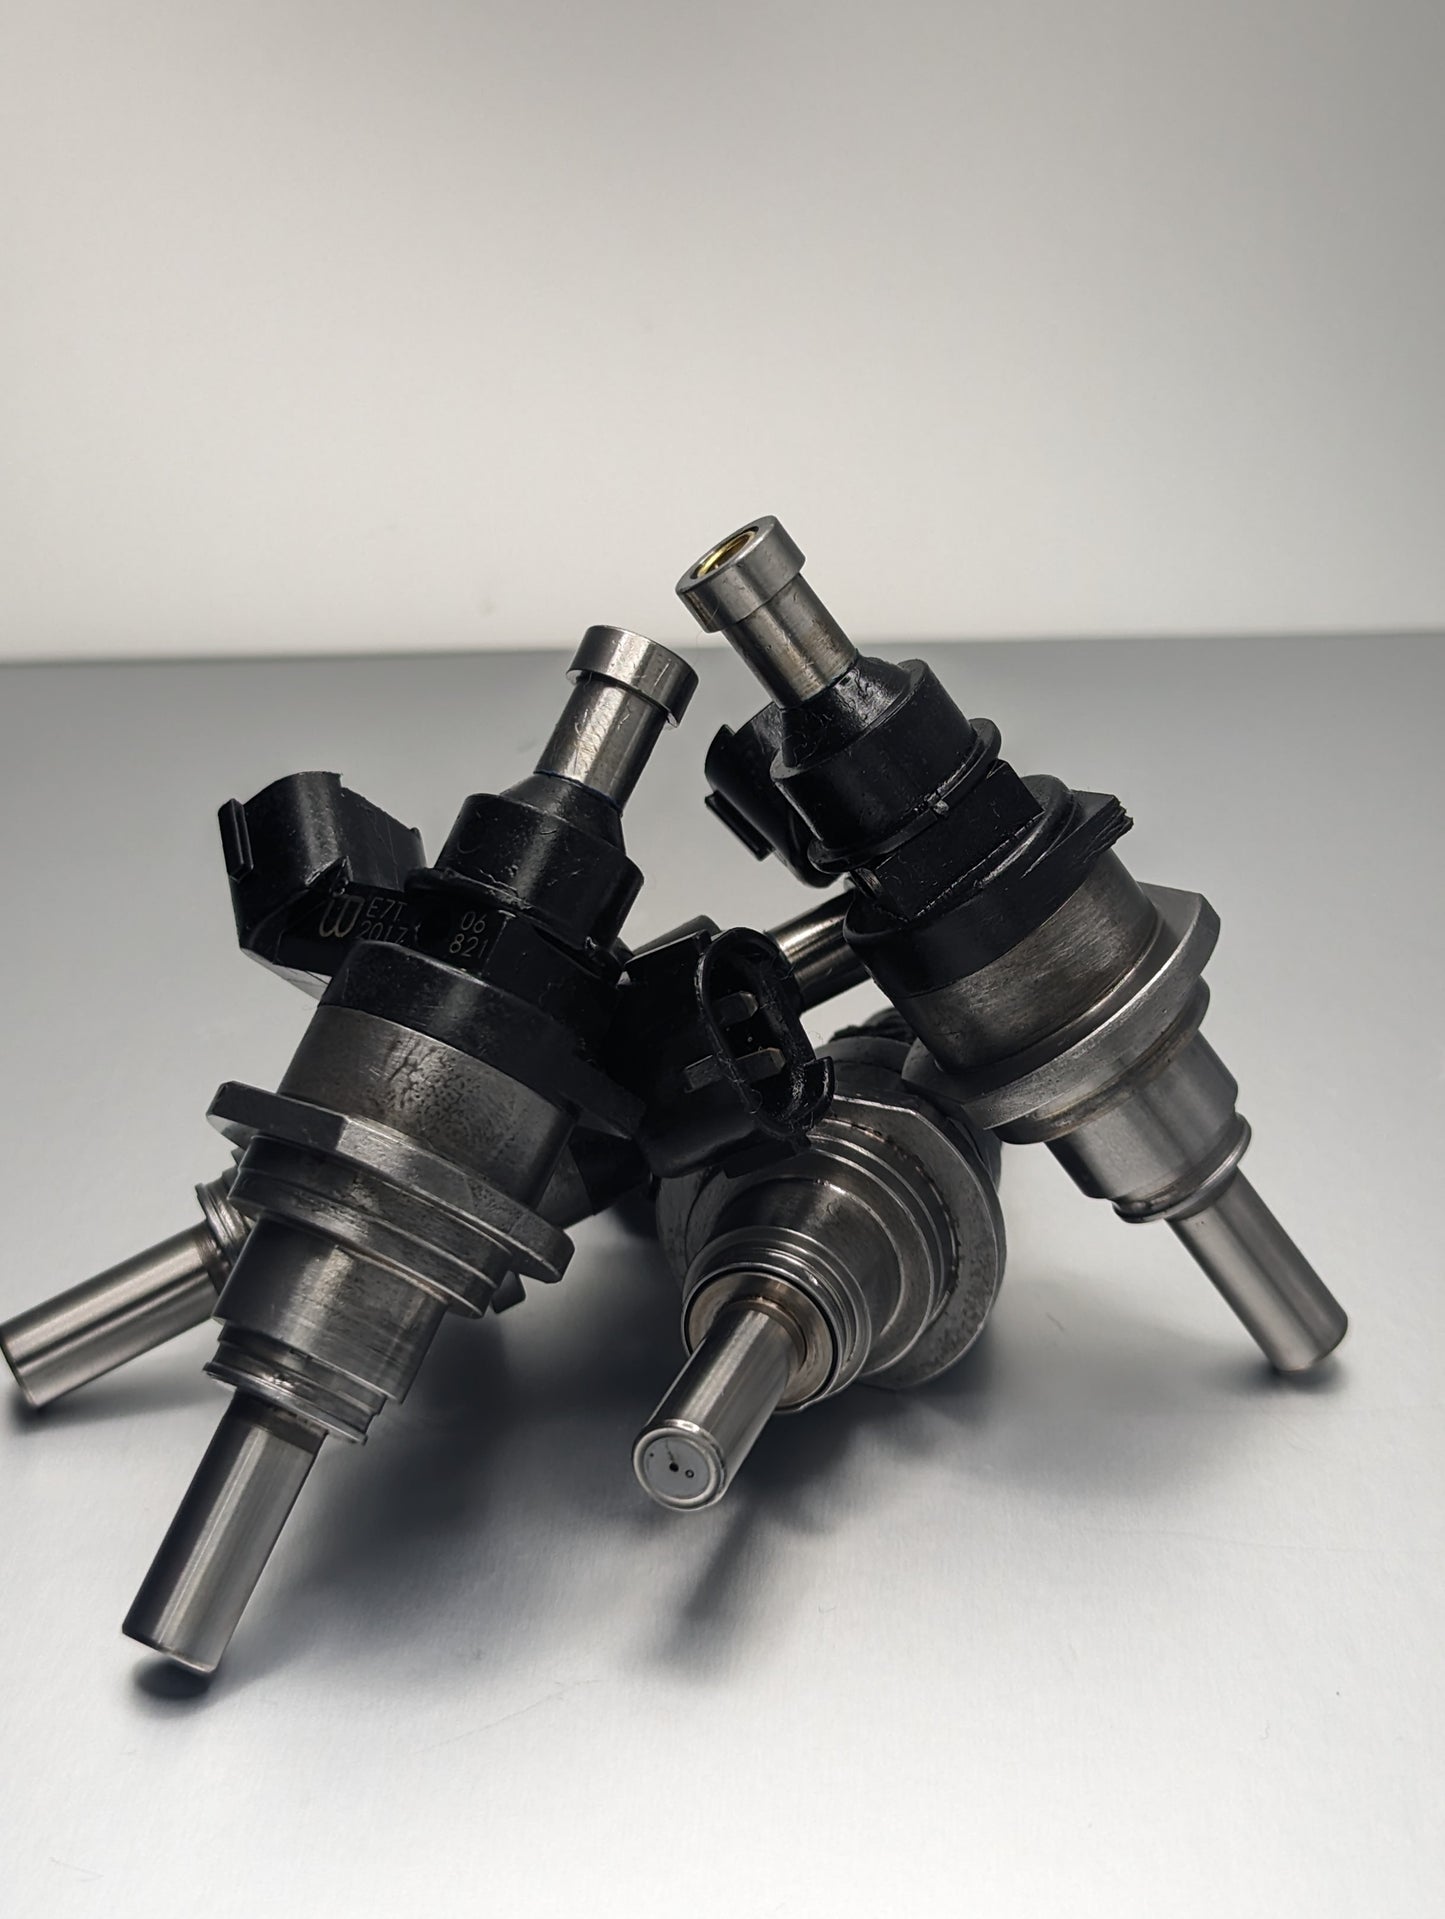 Mazdaspeed 3/6 Direct Injection Injectors